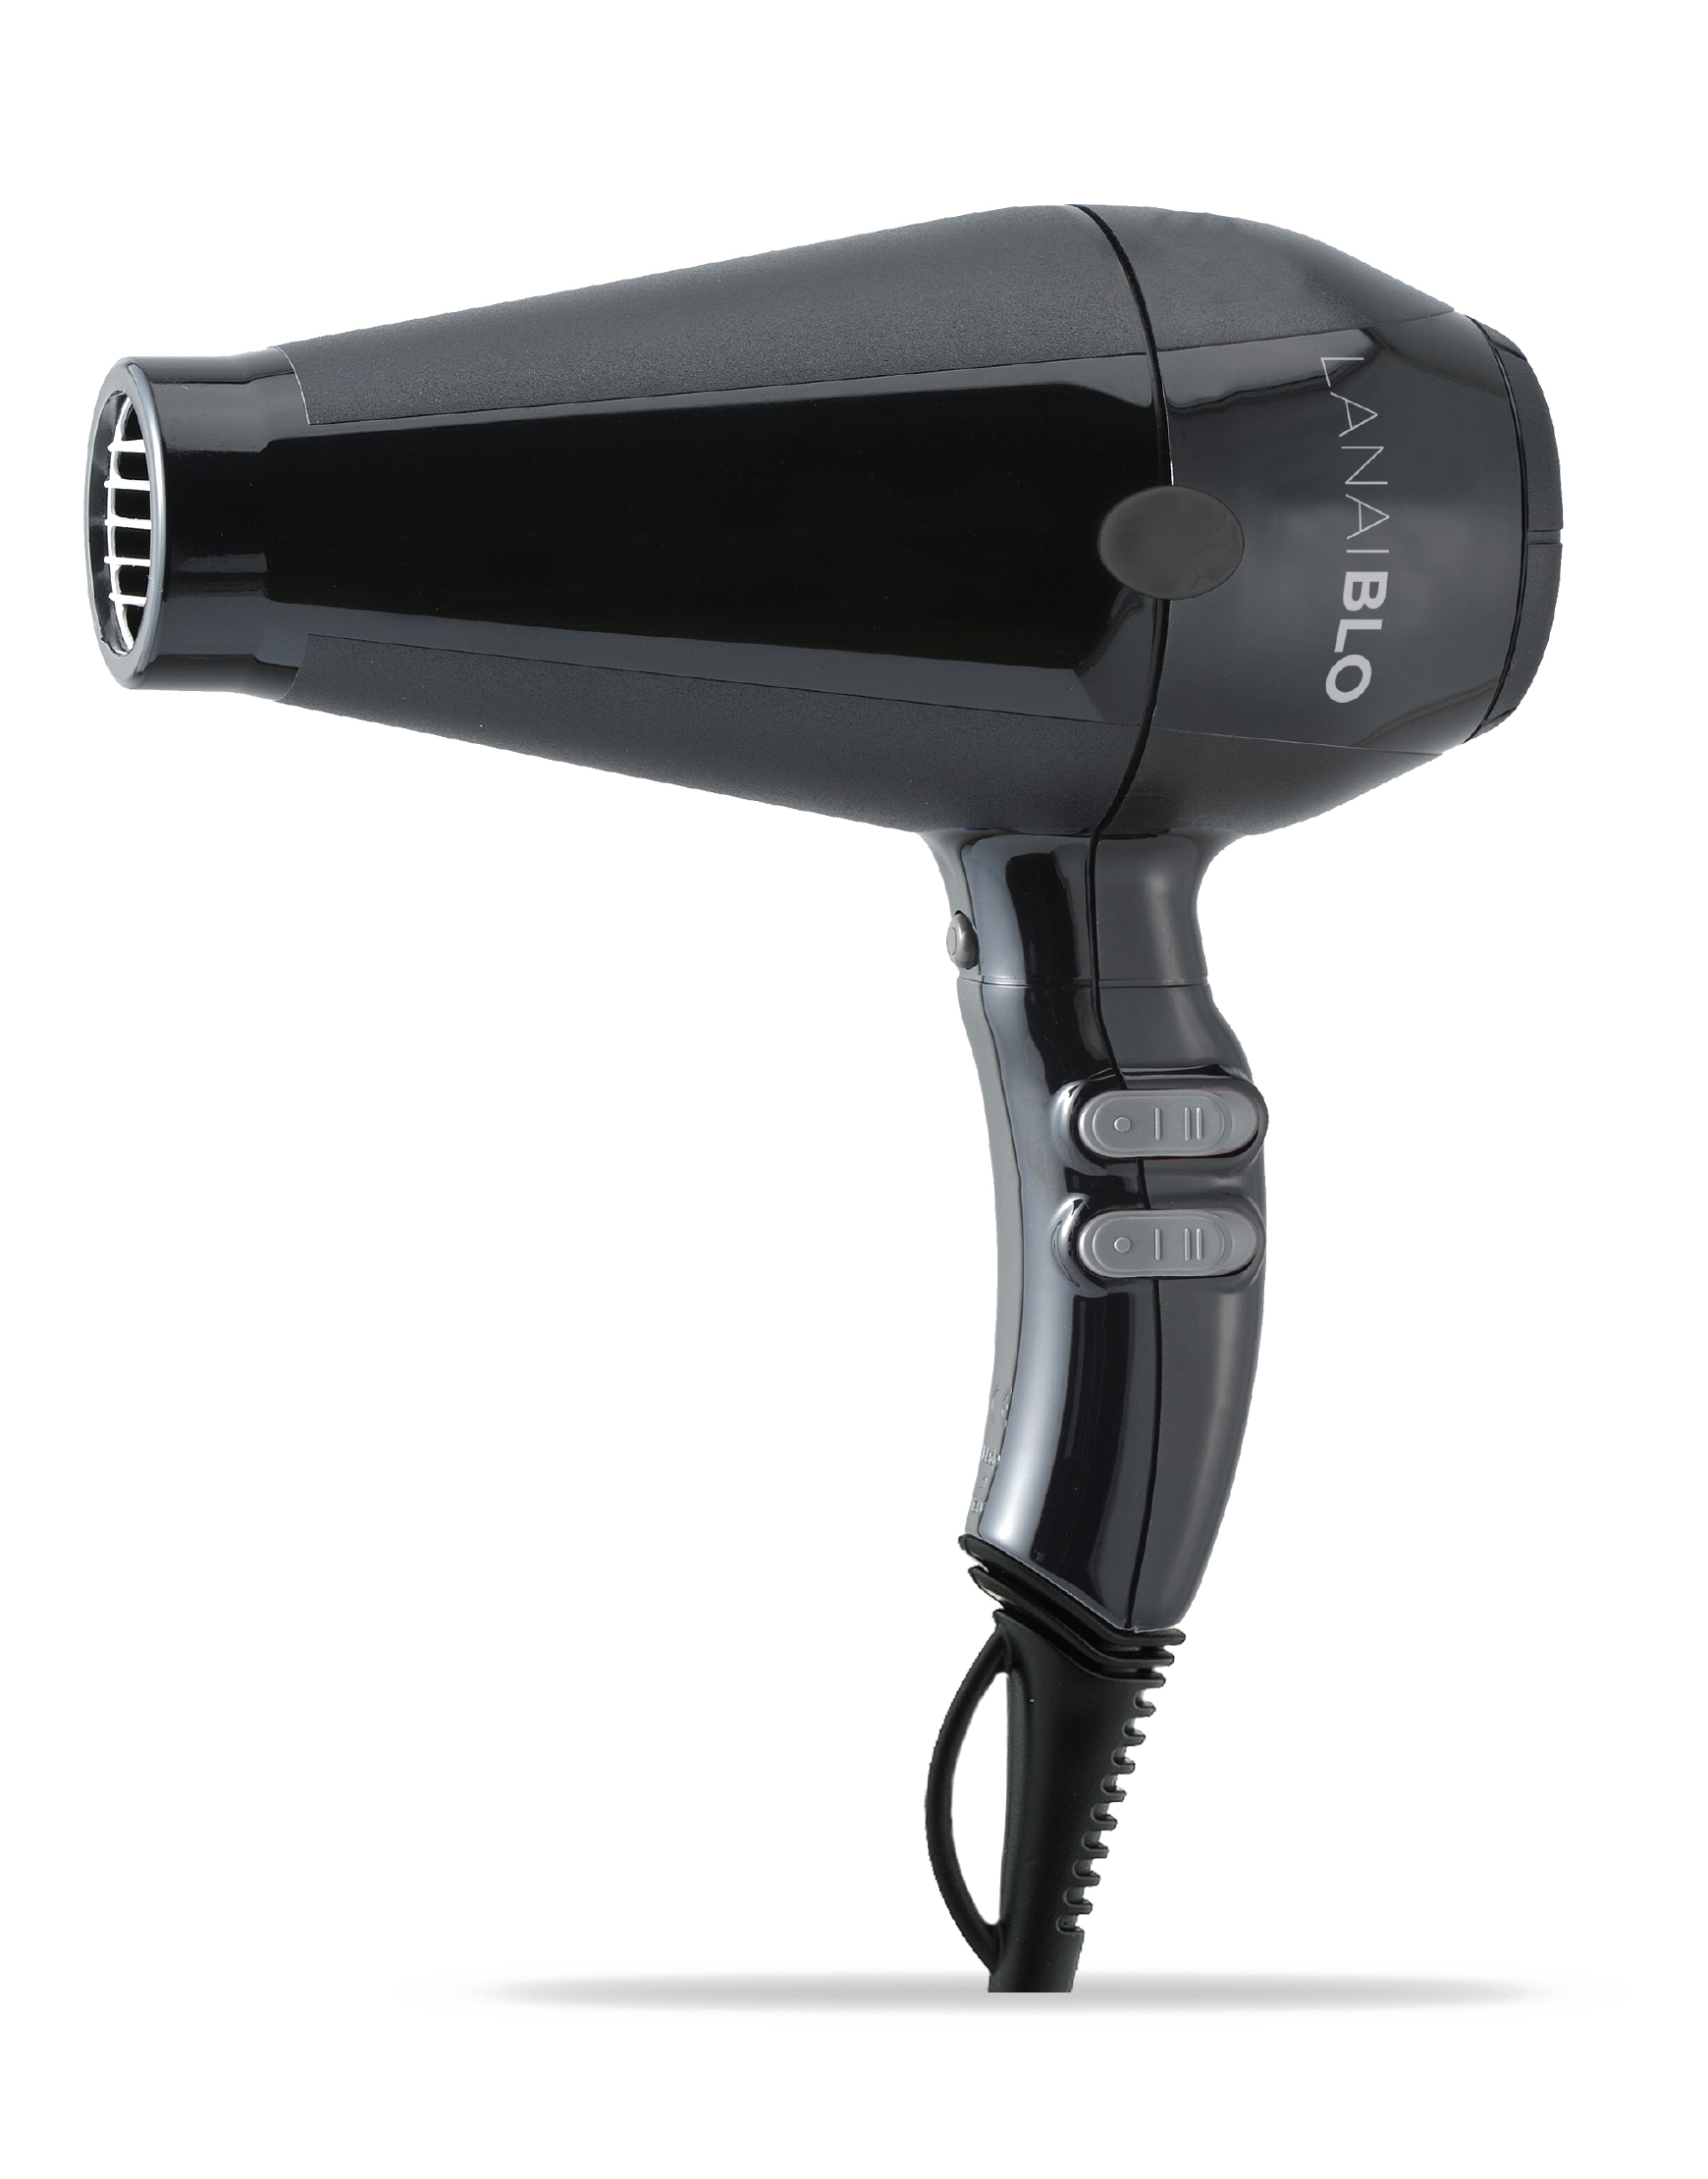 Hair Dryer Picture Download Free Image PNG Image